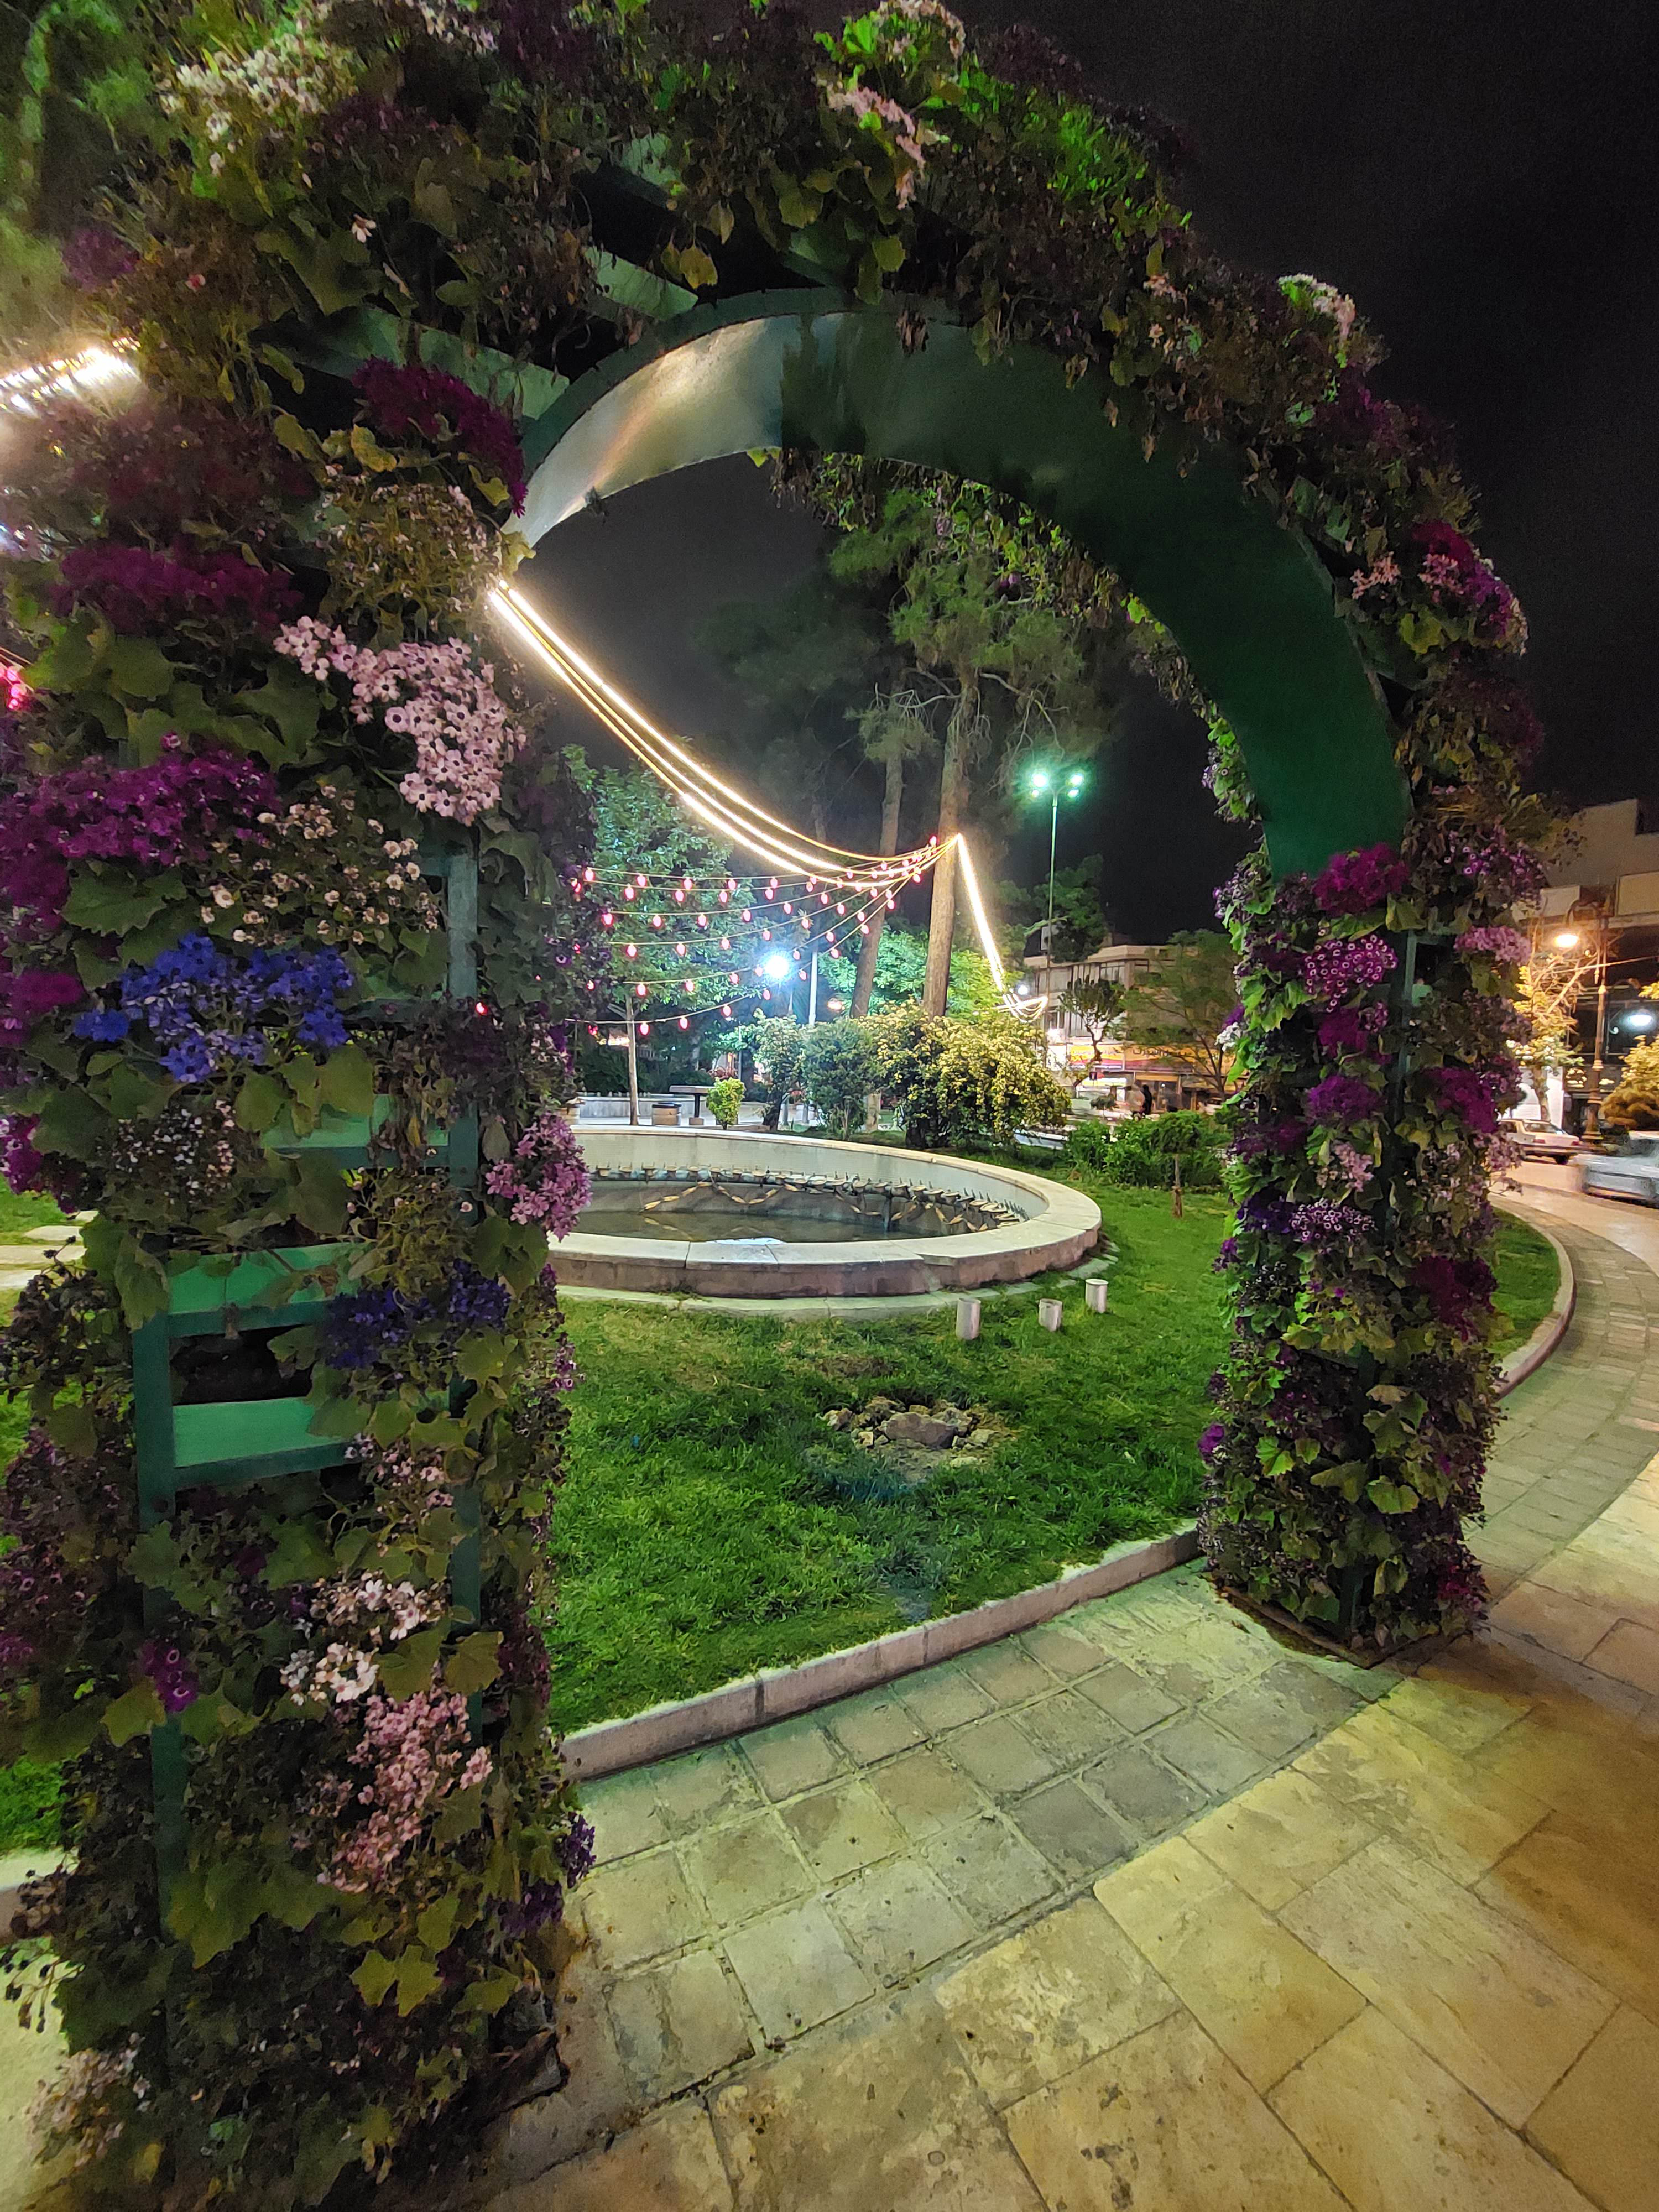 Sample photo of Galaxy A52 ultraviolet camera in low light - Haft Houz Square entrance